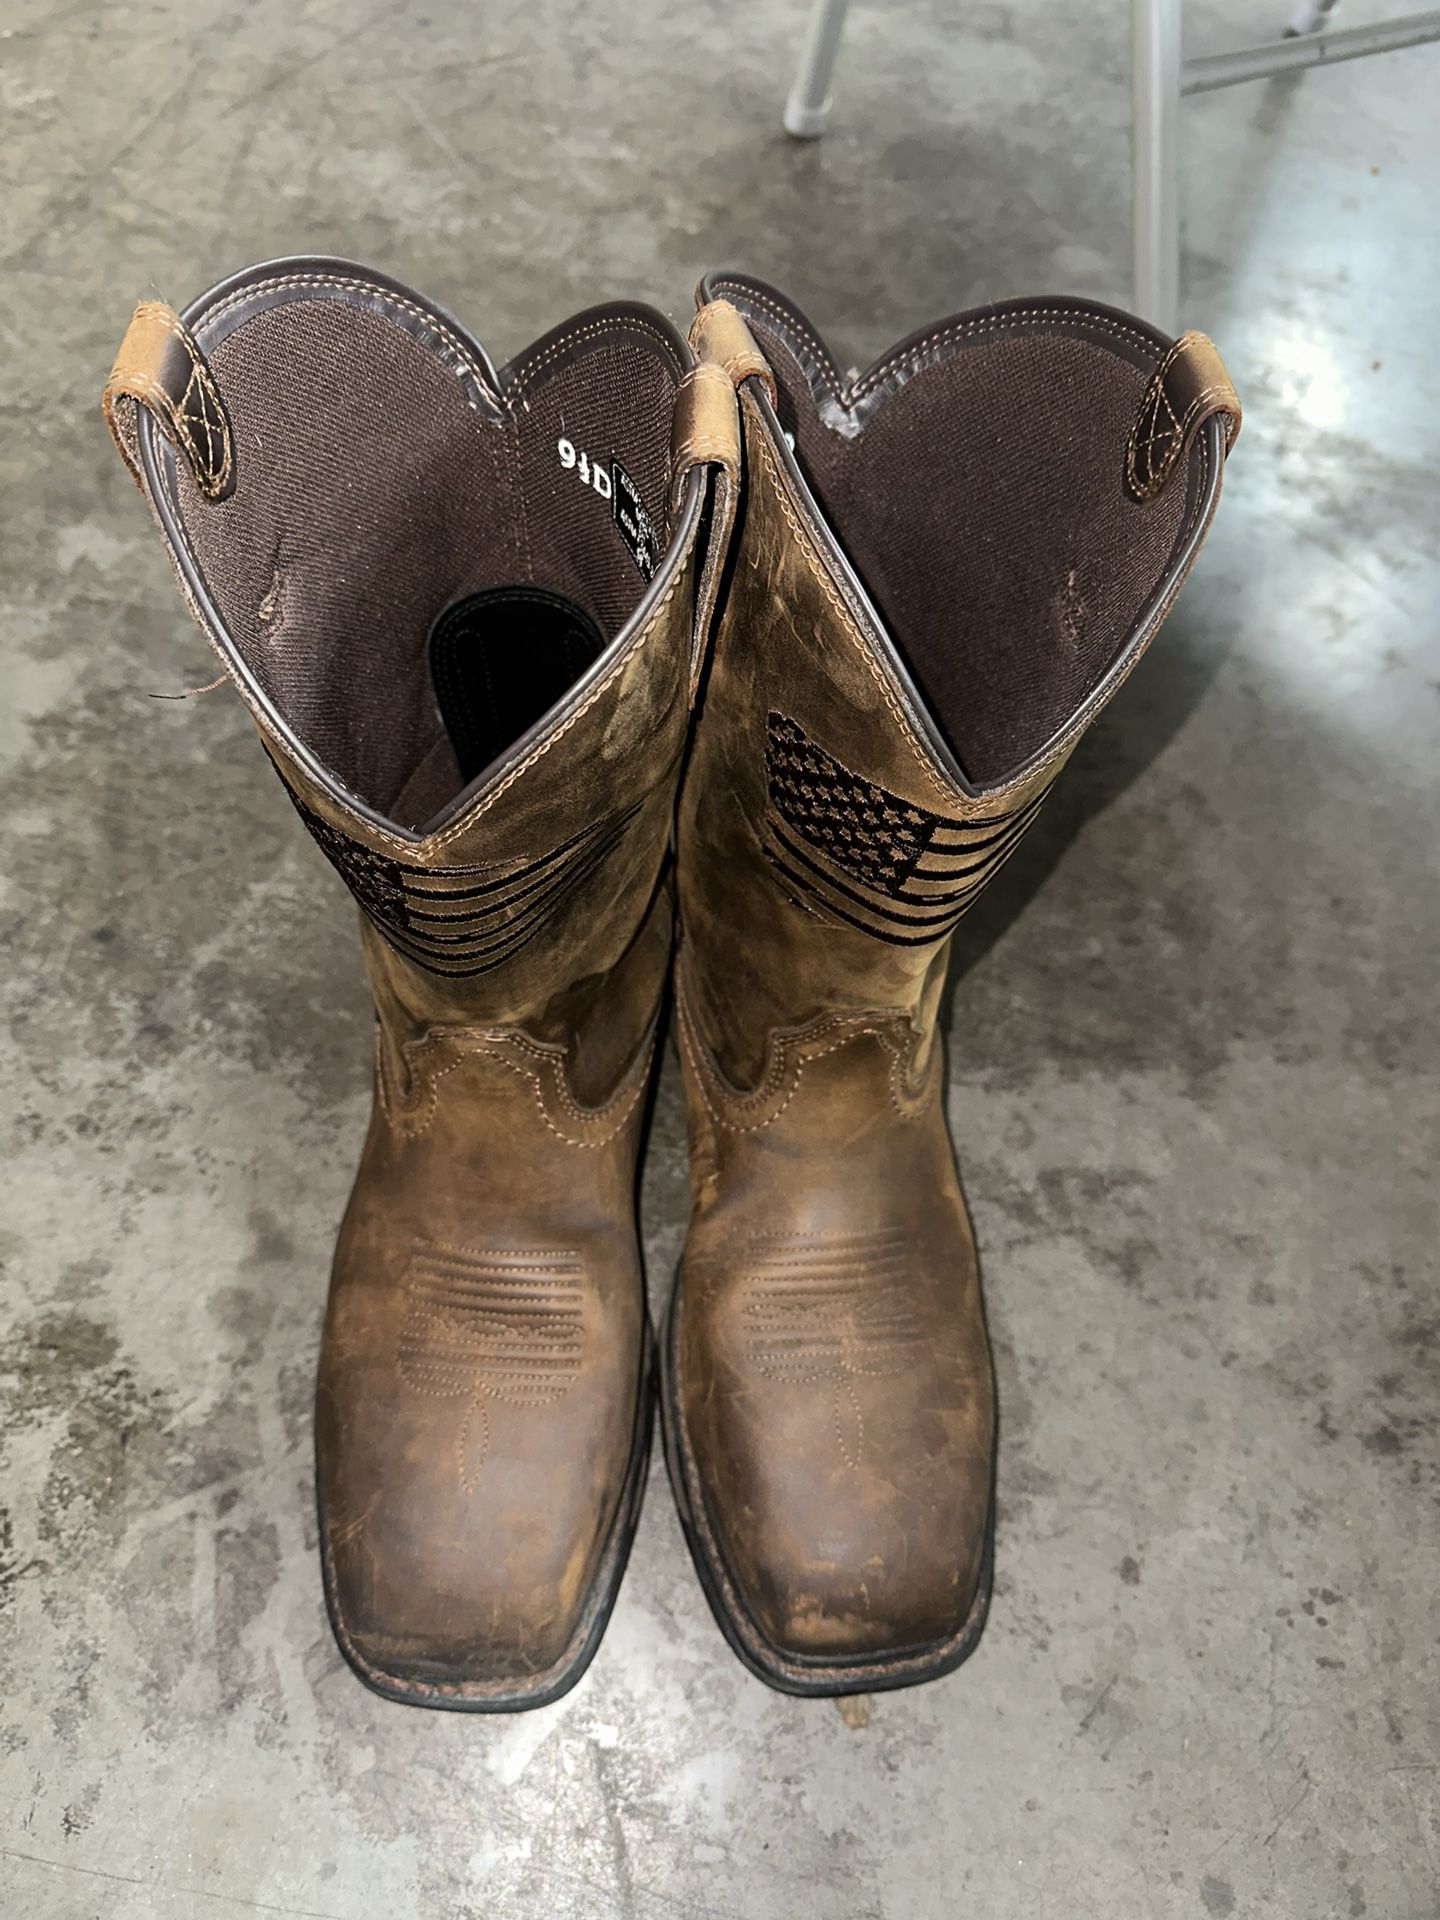 Ariat Western Style Work Boots 